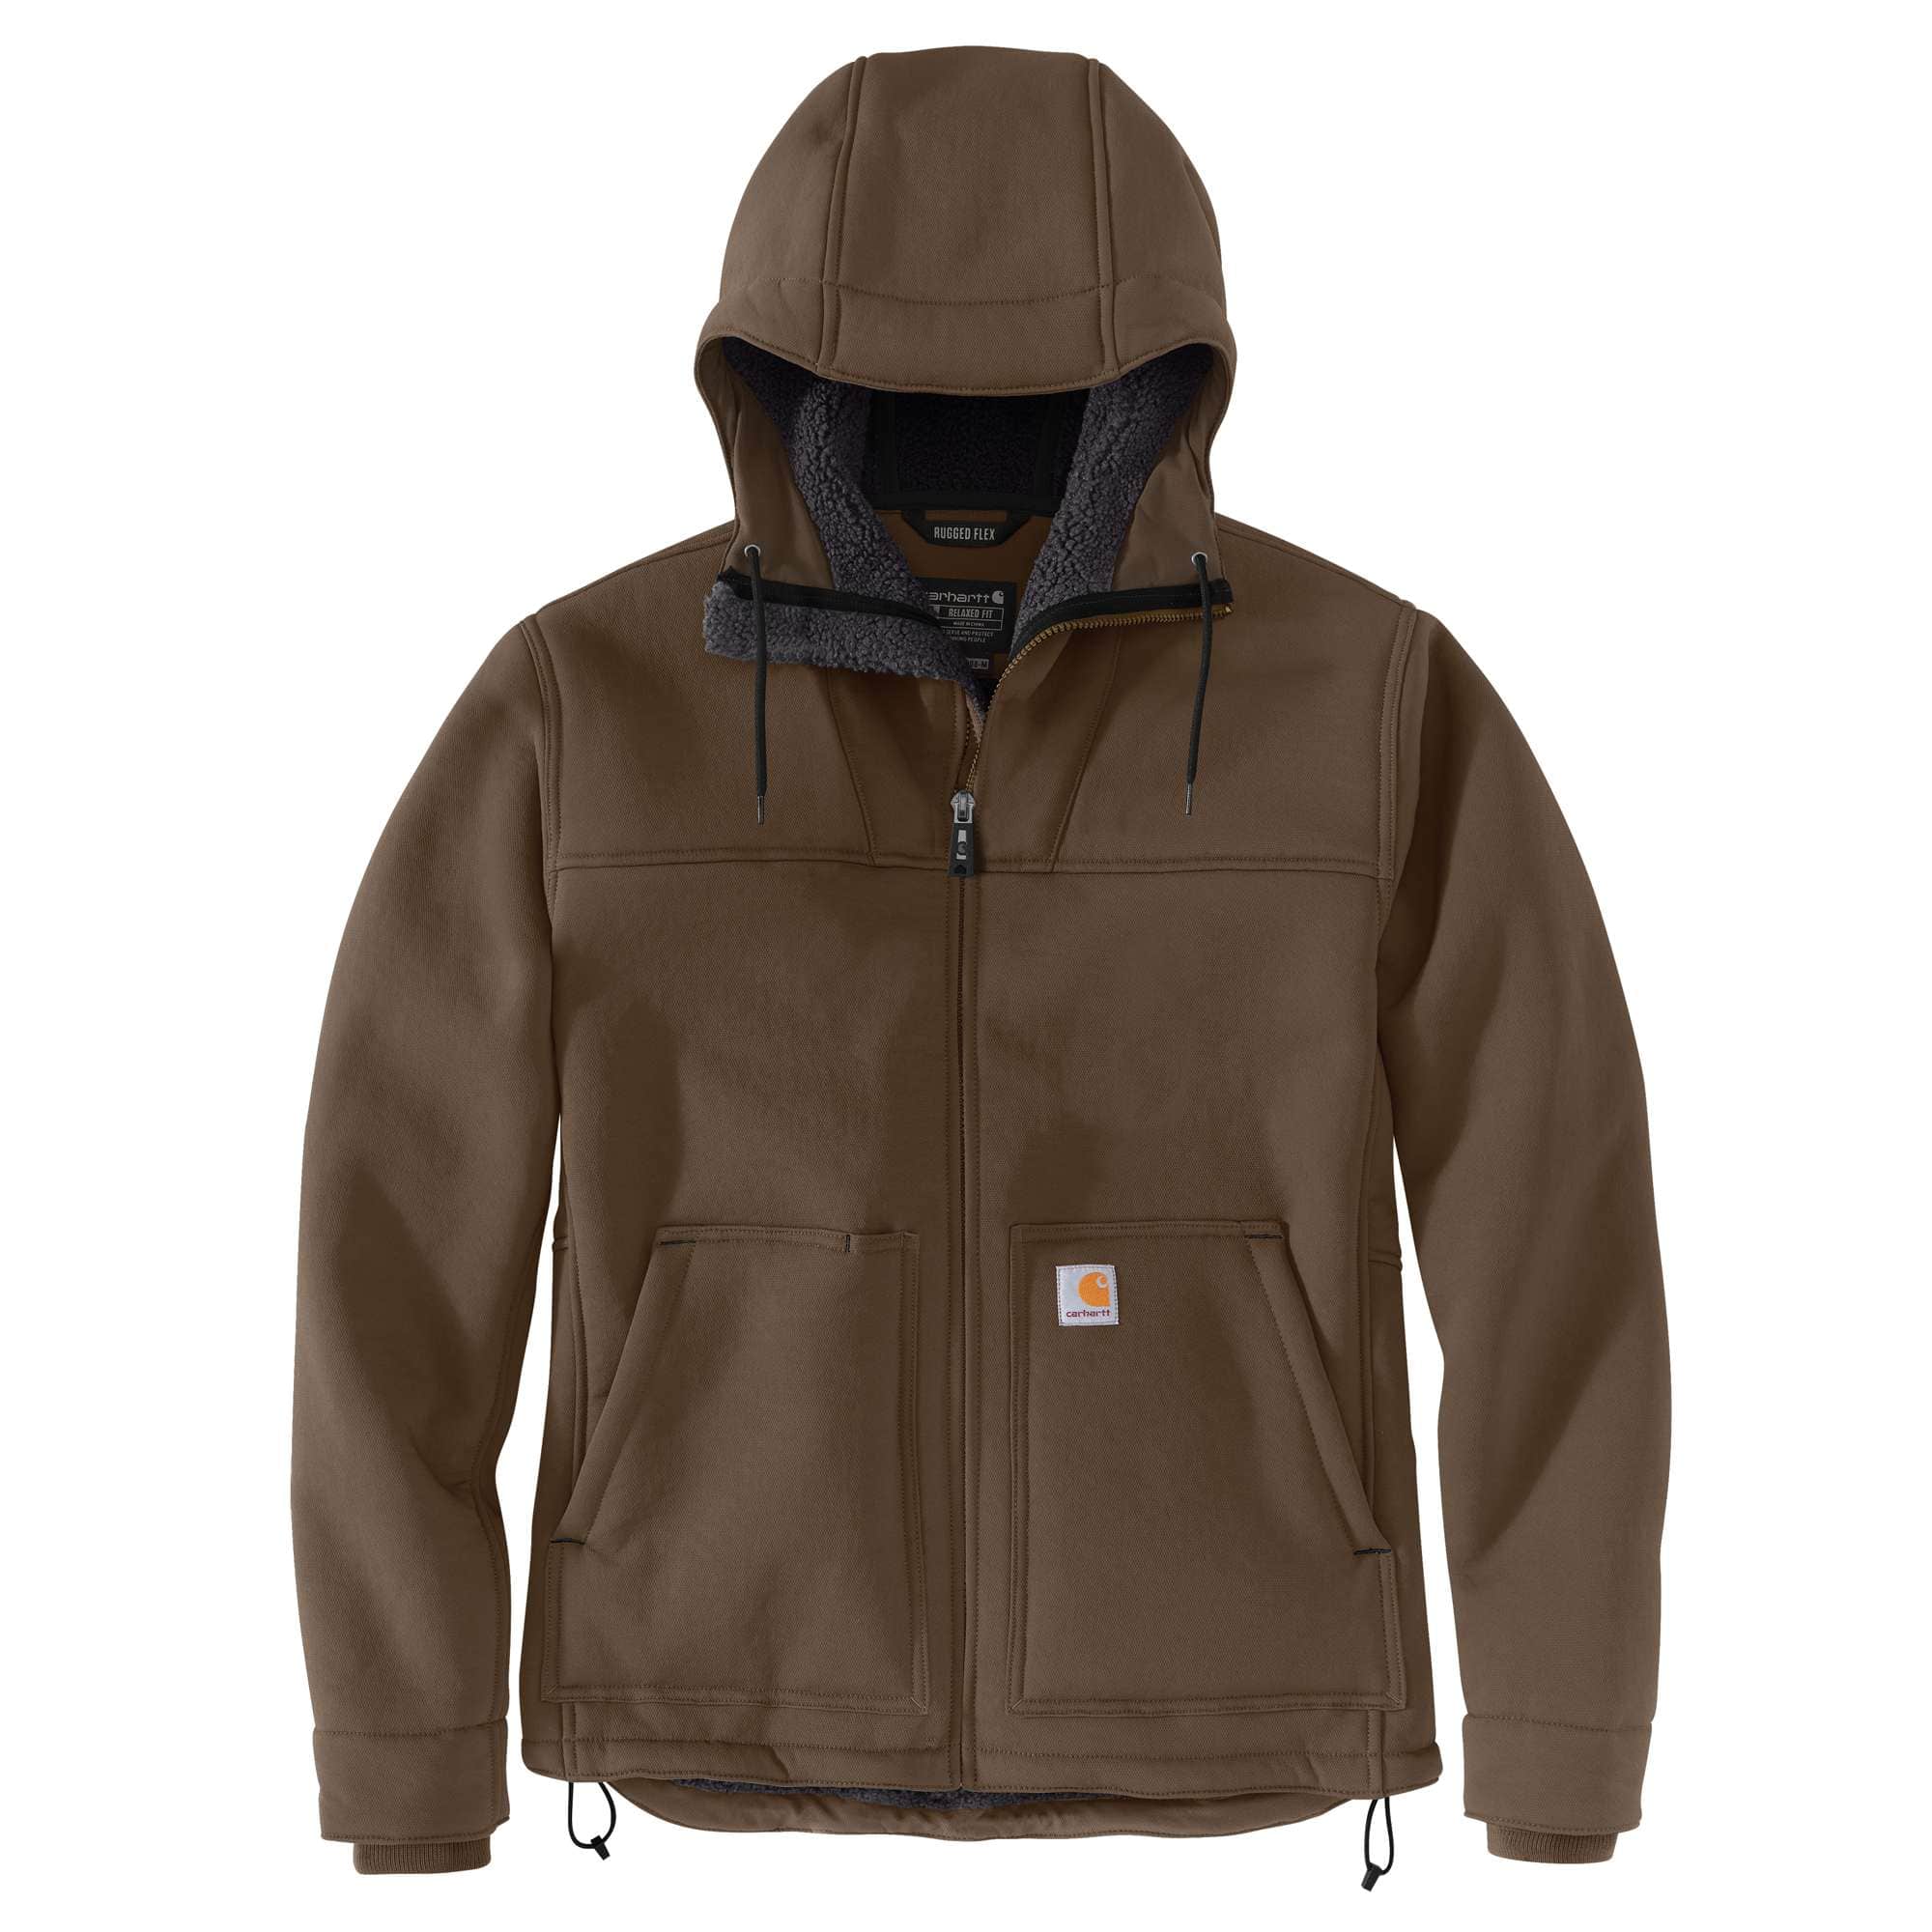 Carhartt Baggy Reworked Jackets – Creed Vintage